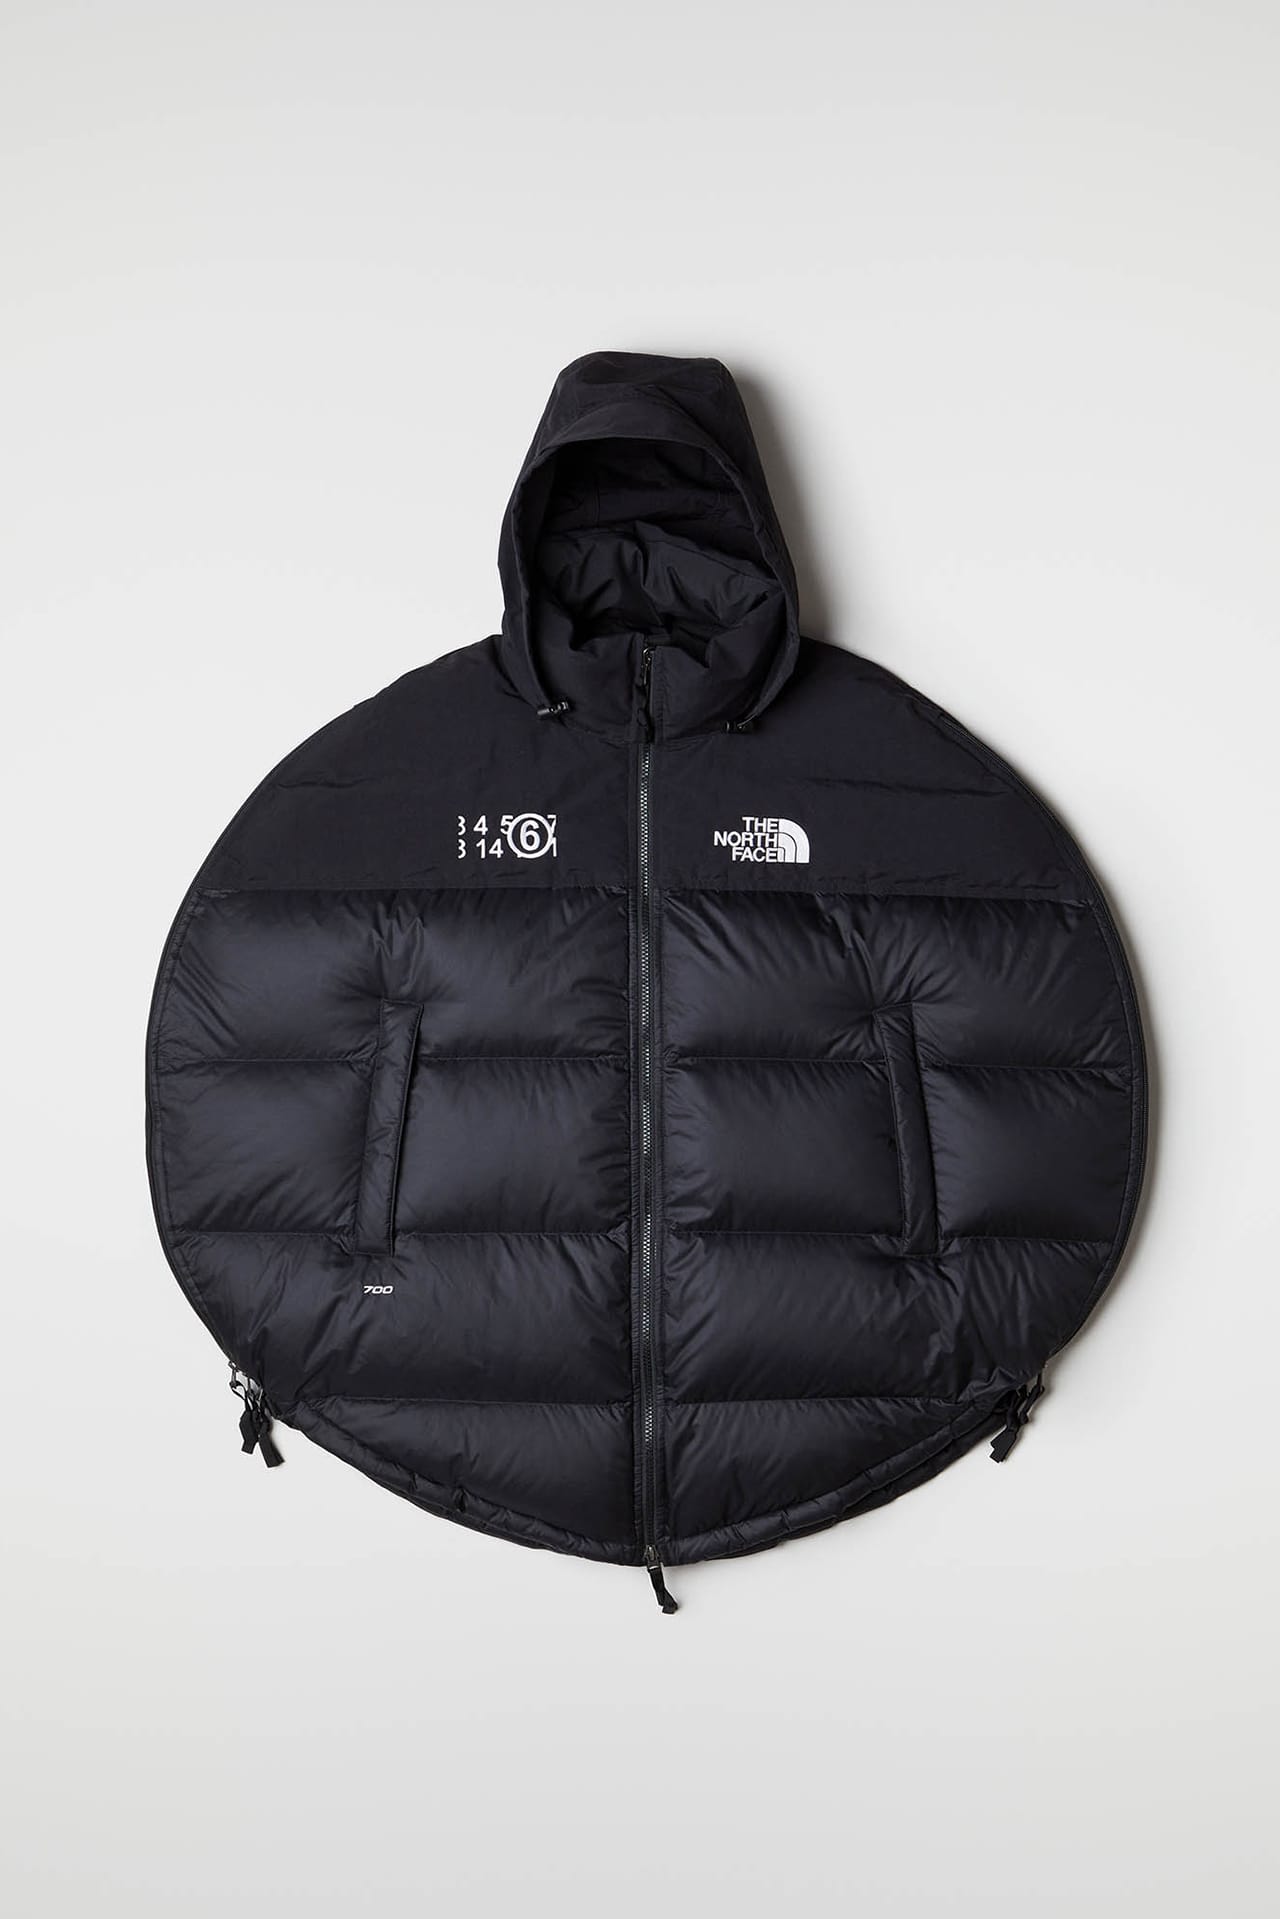 the north face black puffer